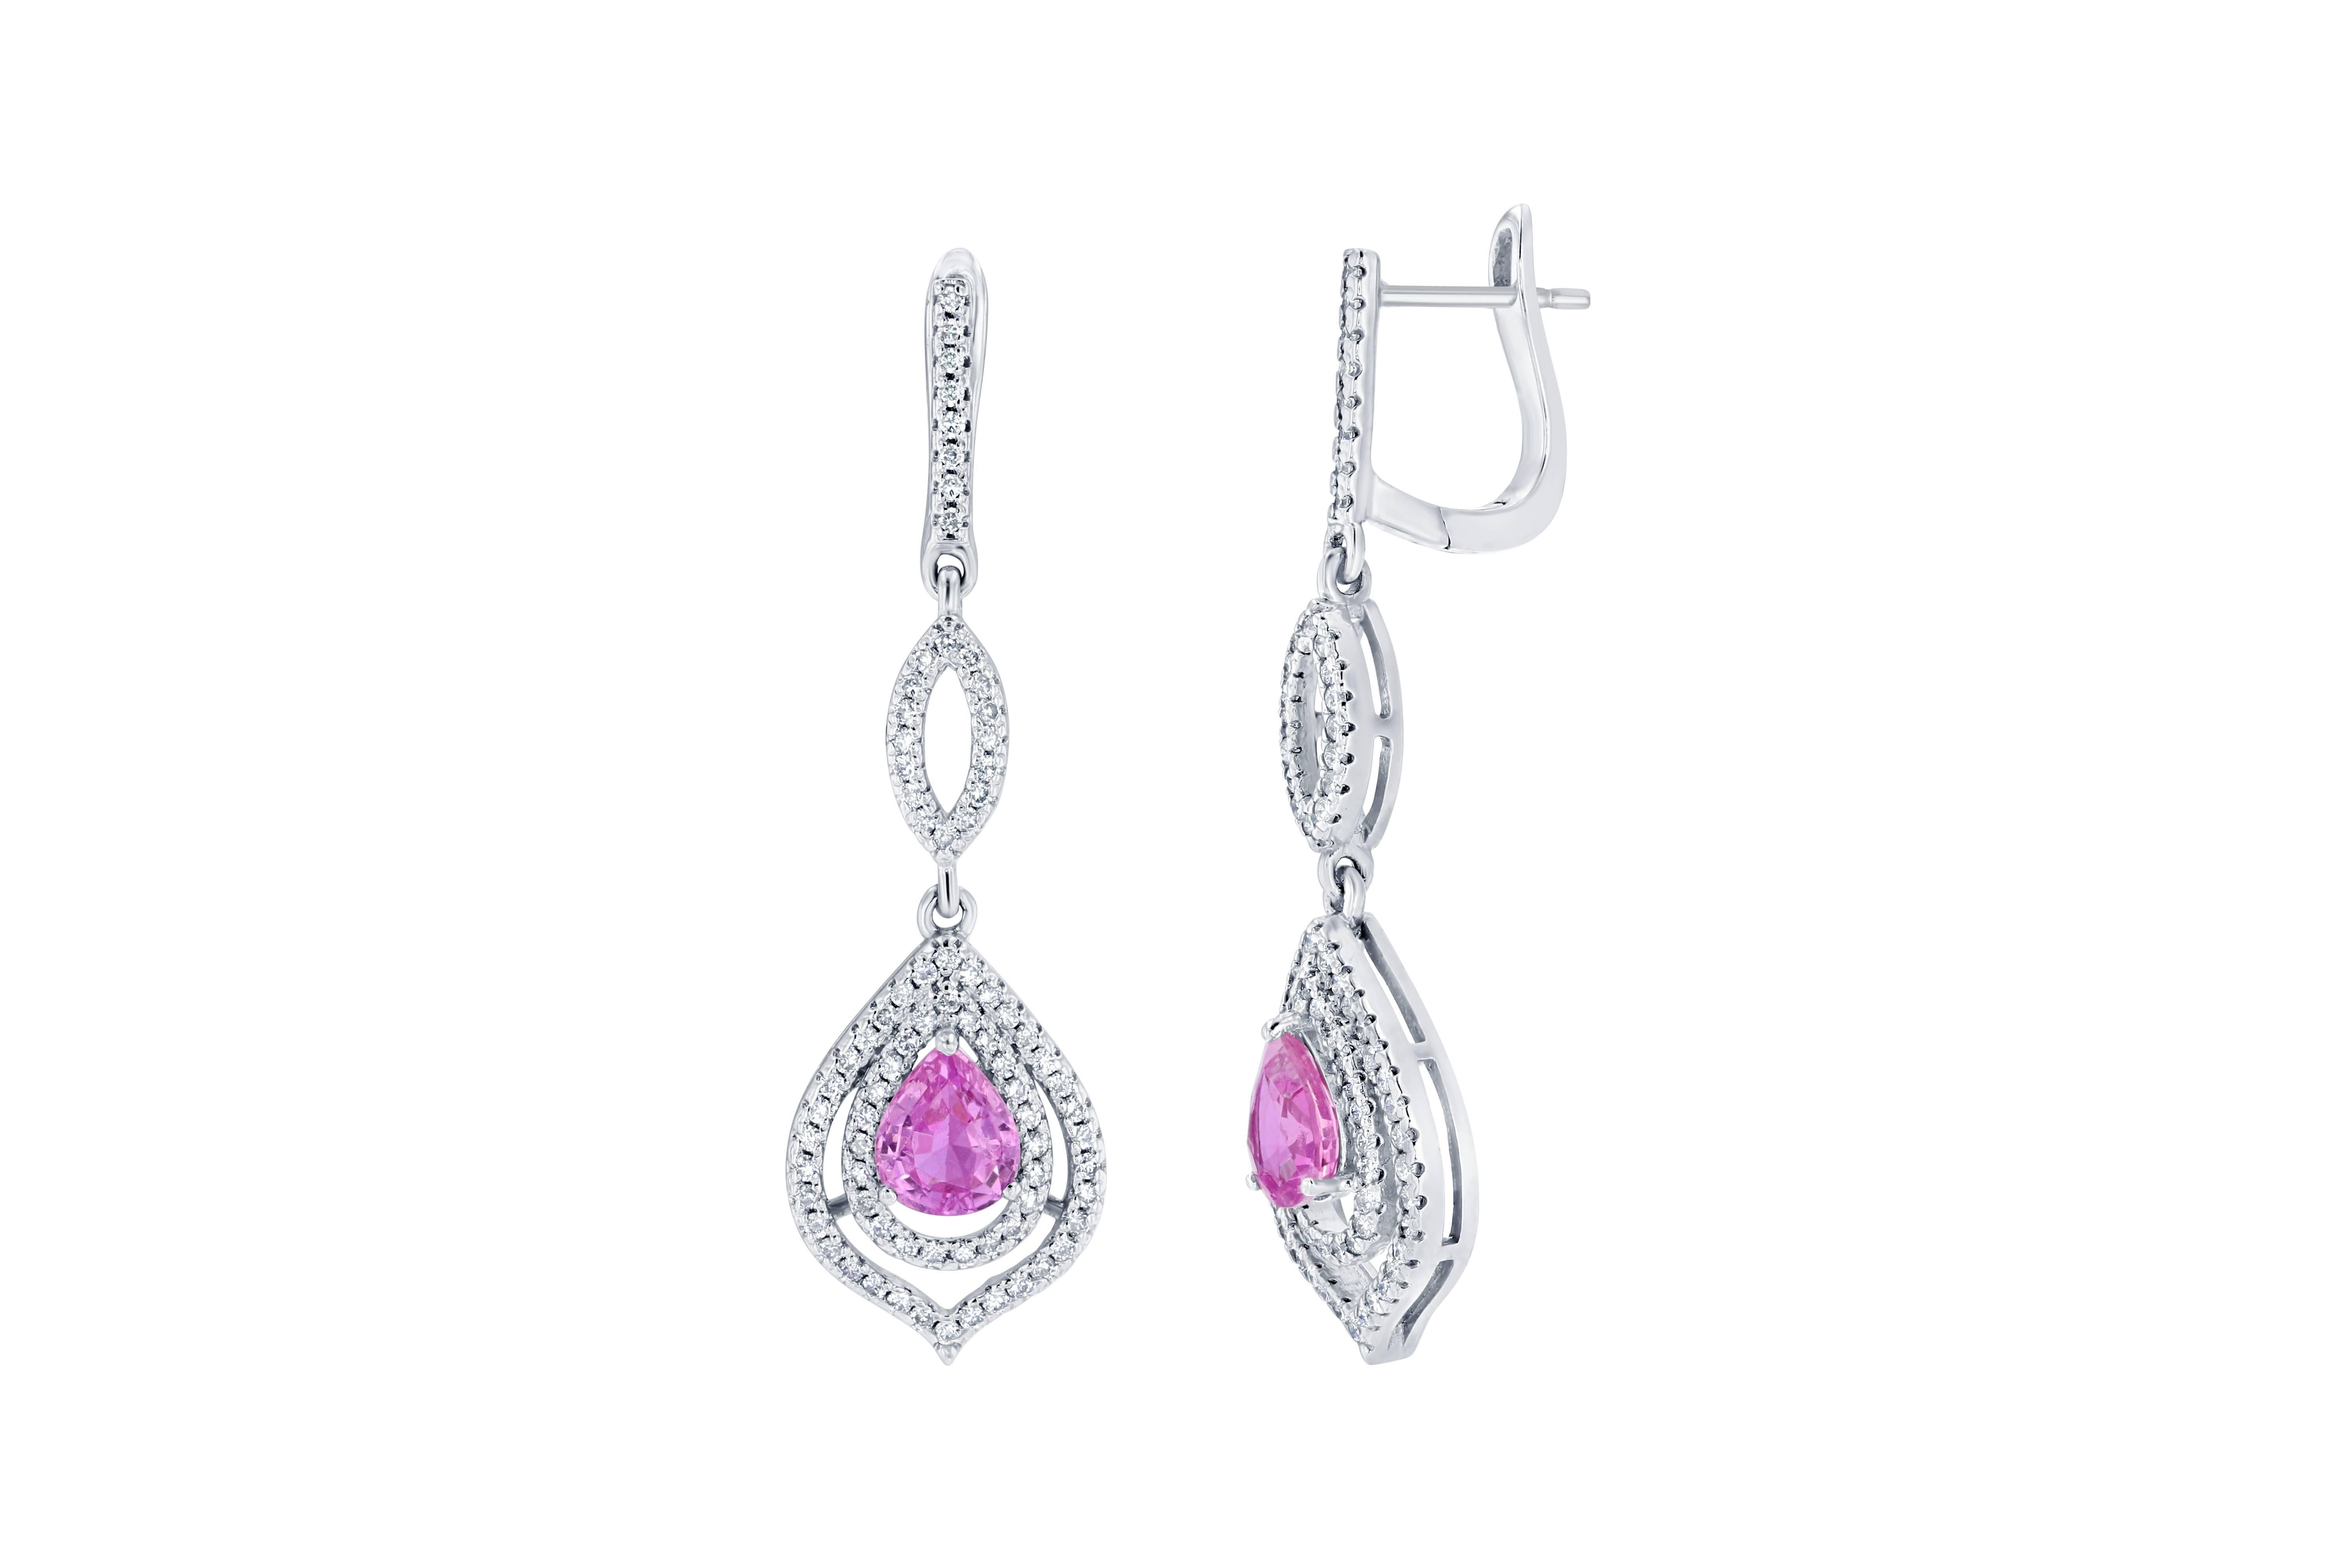 There are 2 Pear Cut Pink Sapphires that weigh 2.05 carats and are surrounded by 164 Round Cut Diamonds that weigh 0.85 carats.  The earrings are made in 14K White gold and weigh approximately 6.7 grams.  The length of the earrings is approx. 1.75